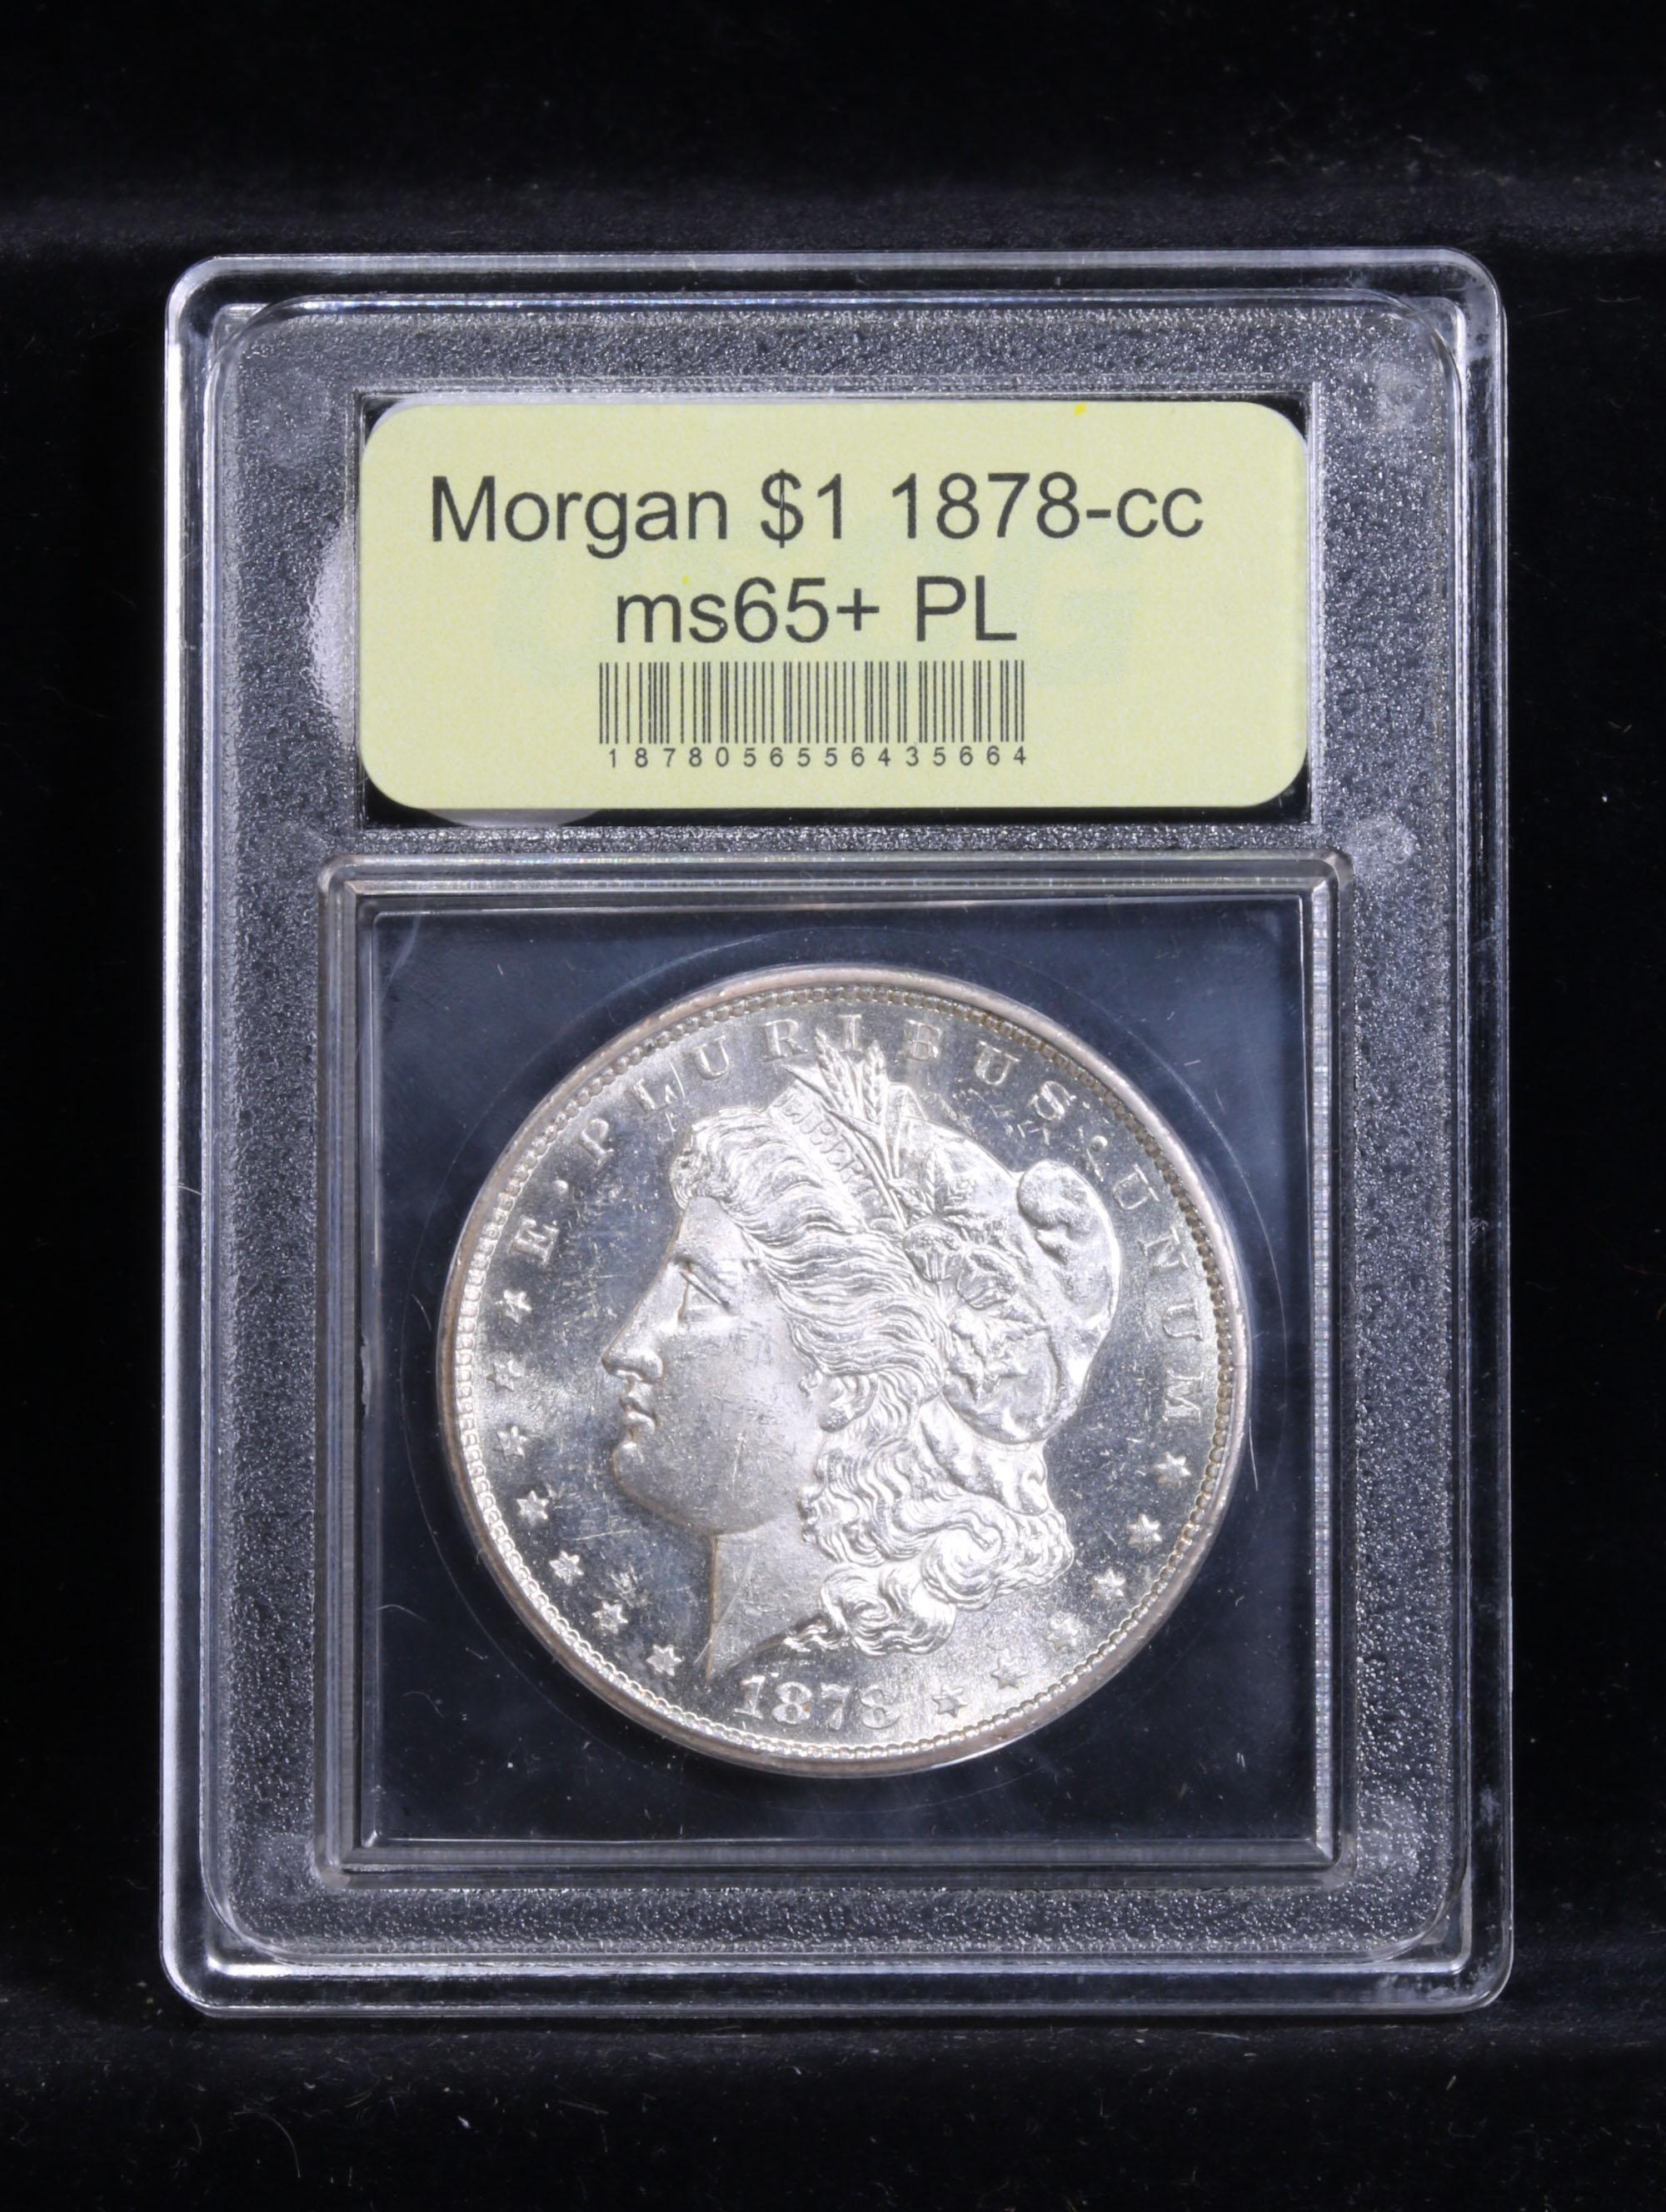 *Auction Highlight* 1878-cc Great Cameo Strong Mirrored Fields Morgan $1 Graded GEM+ PL By USCG (fc)